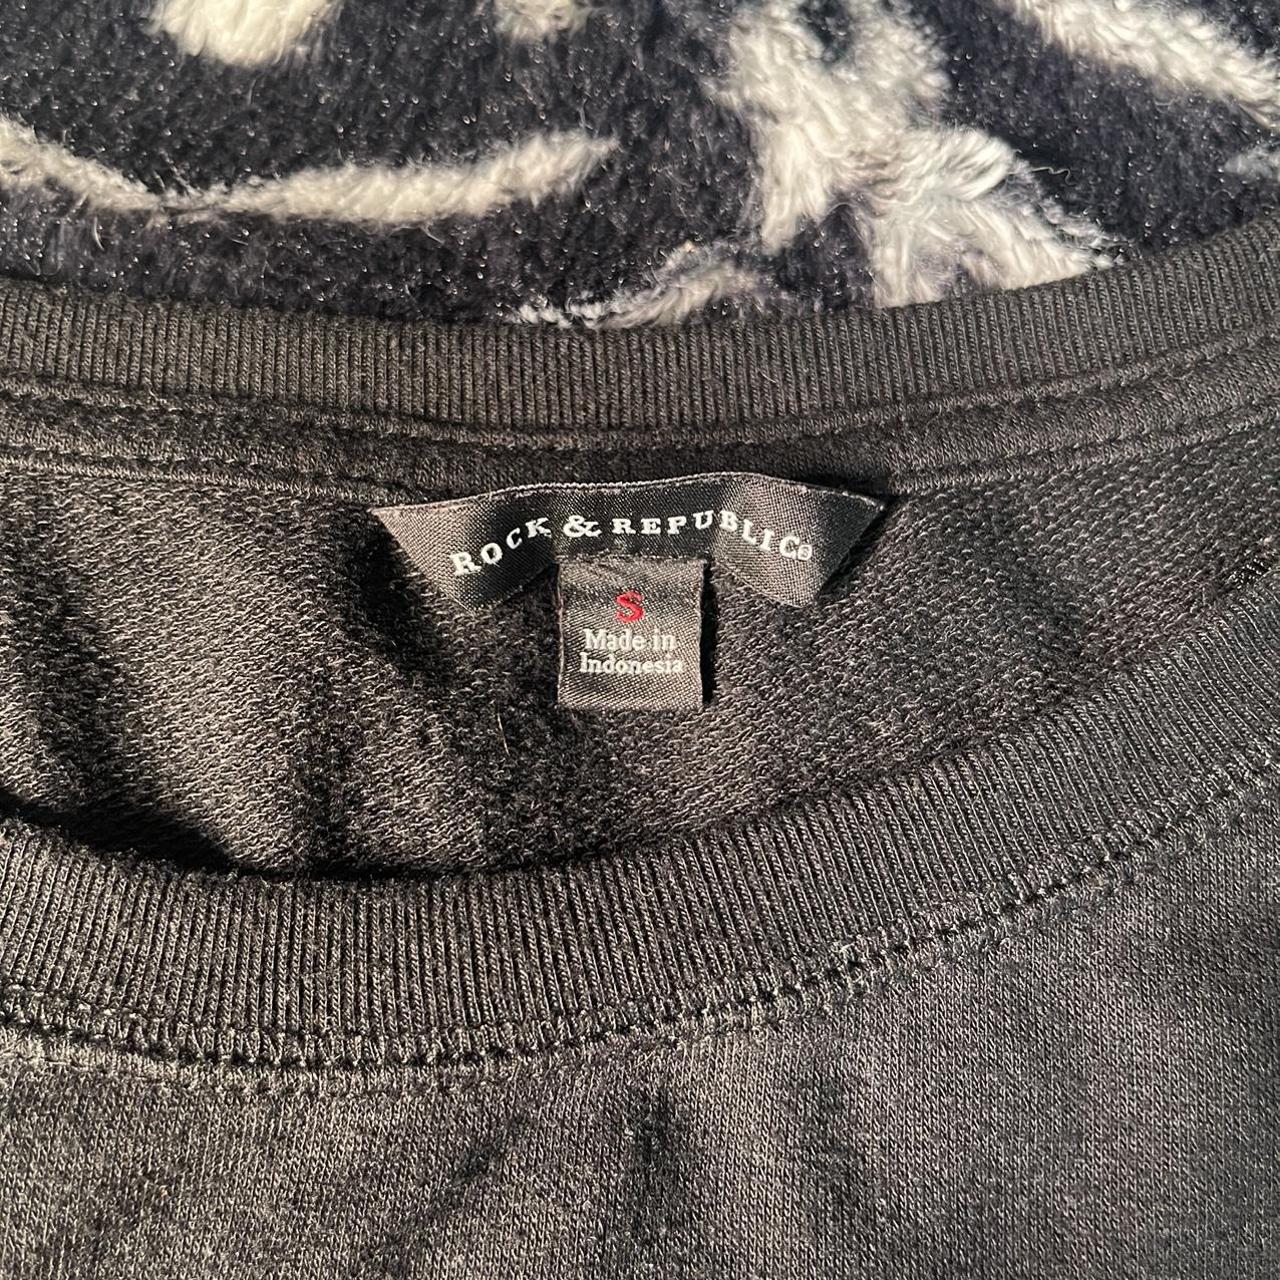 Rock and Republic Women's Black and Grey Shirt (3)